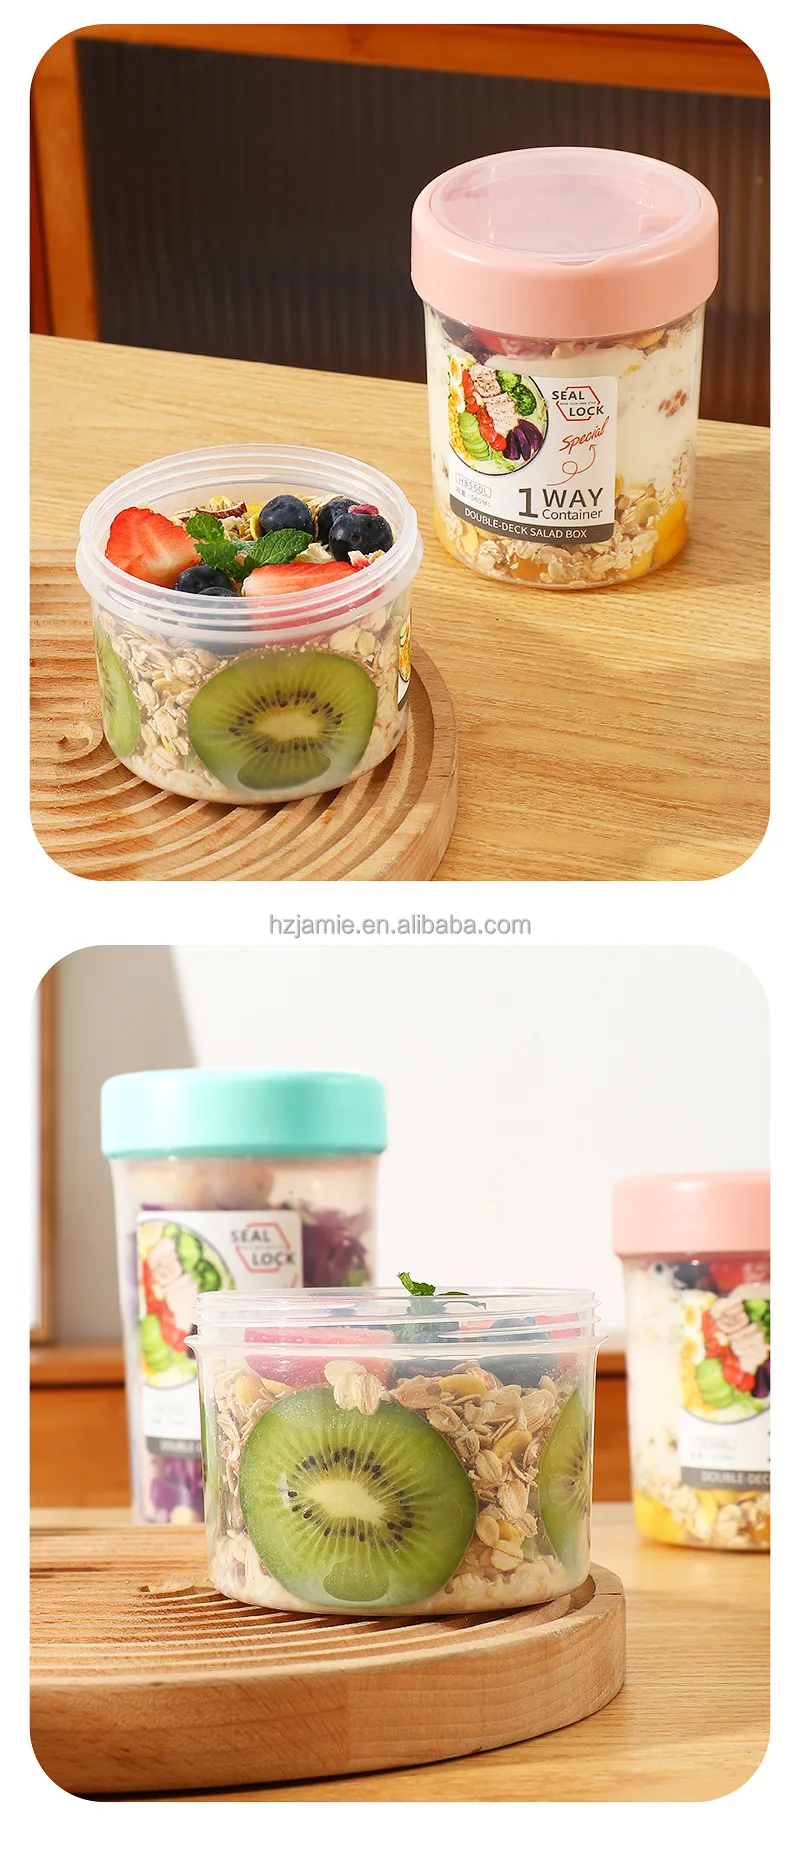 Portable Breakfast On The Go Cups Cereal Milk Container Airtight Food  Storage Box Double Sealed Compartment Crisper Food Storage